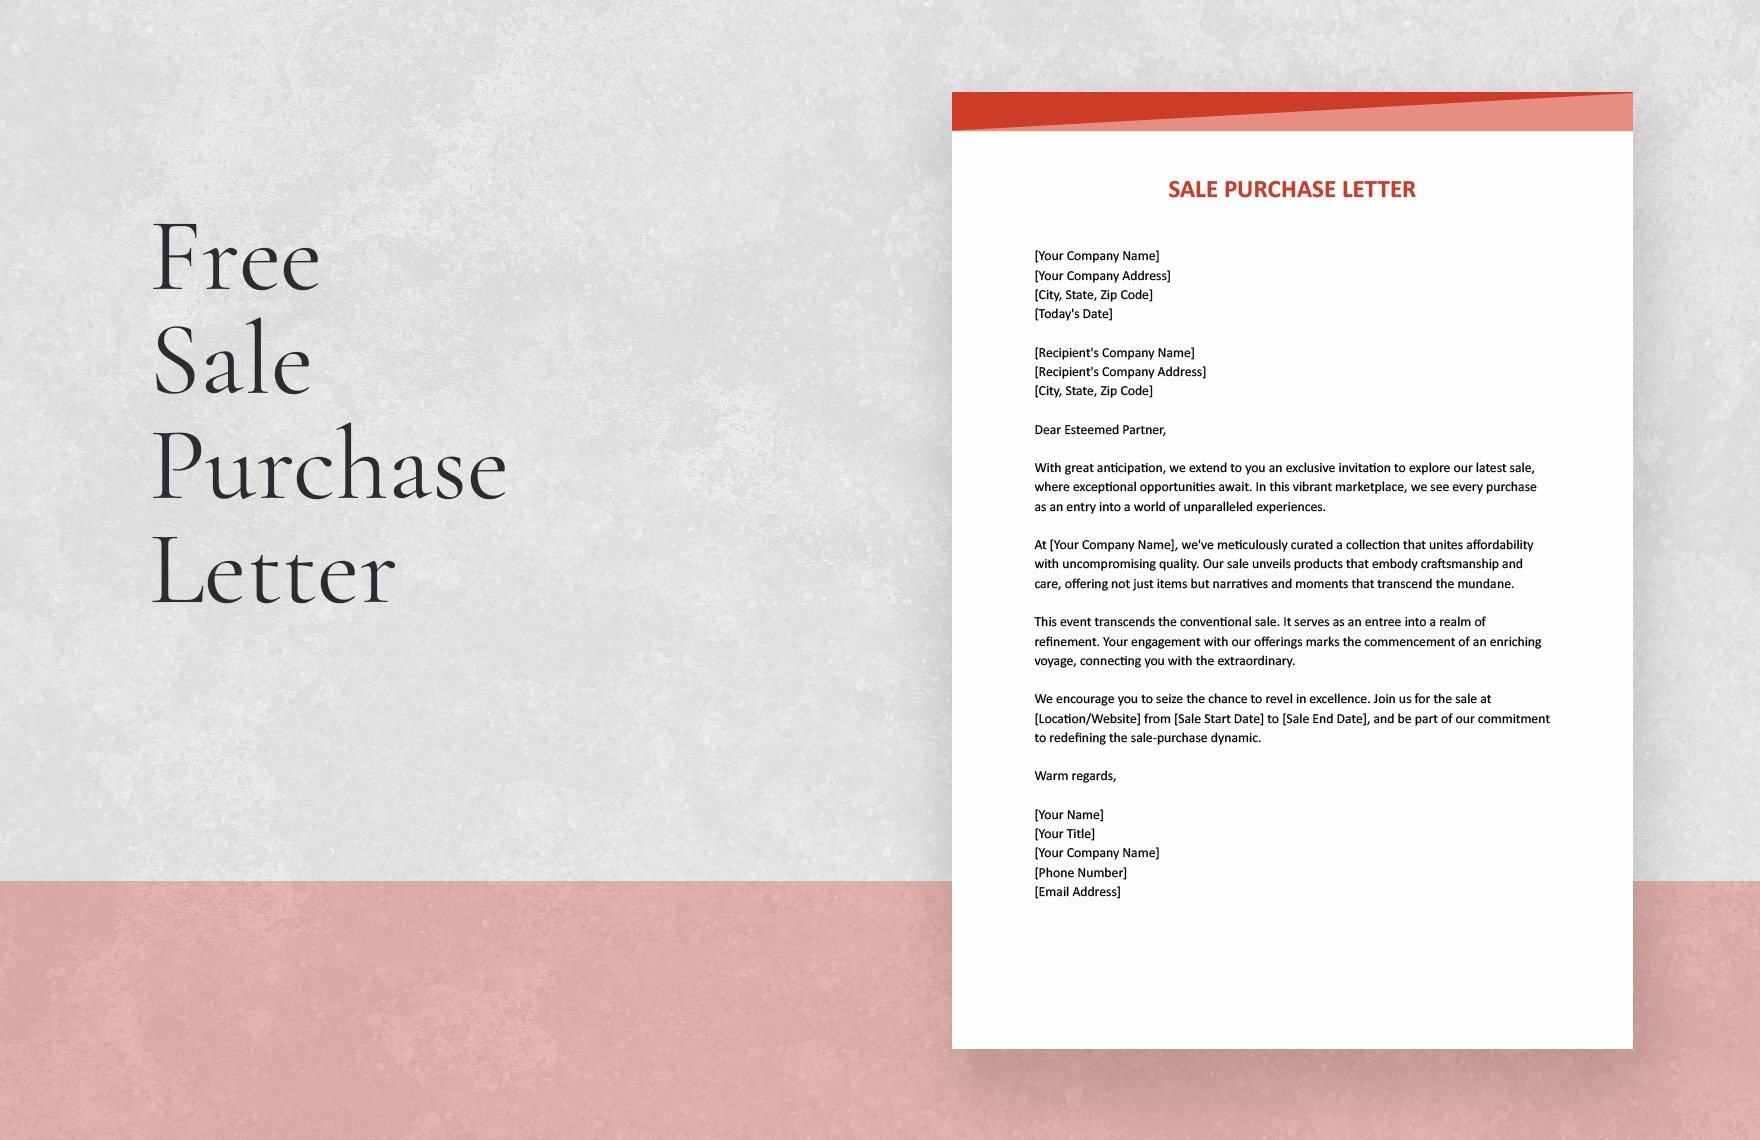 Sale Purchase Letter in Word, Google Docs